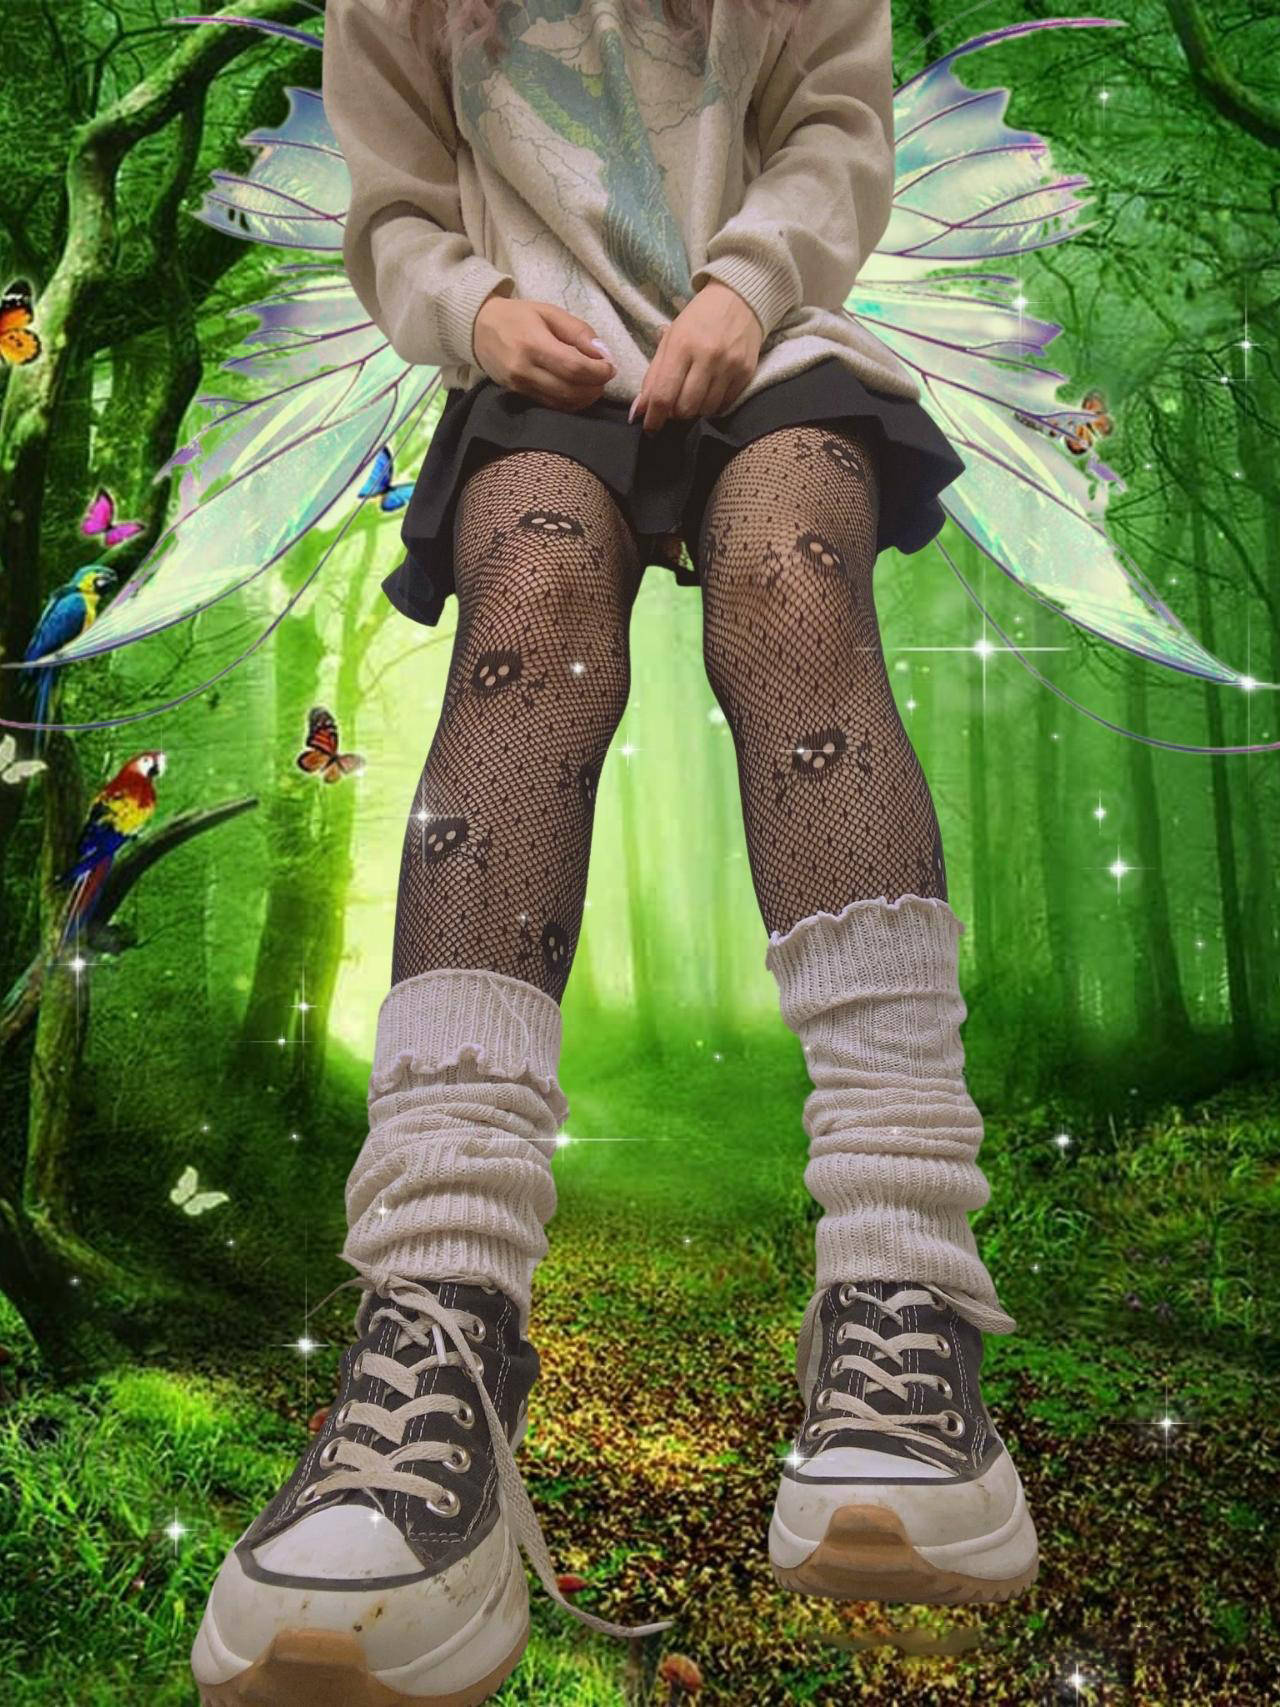 Fairy Grunge Sneakers And Tights